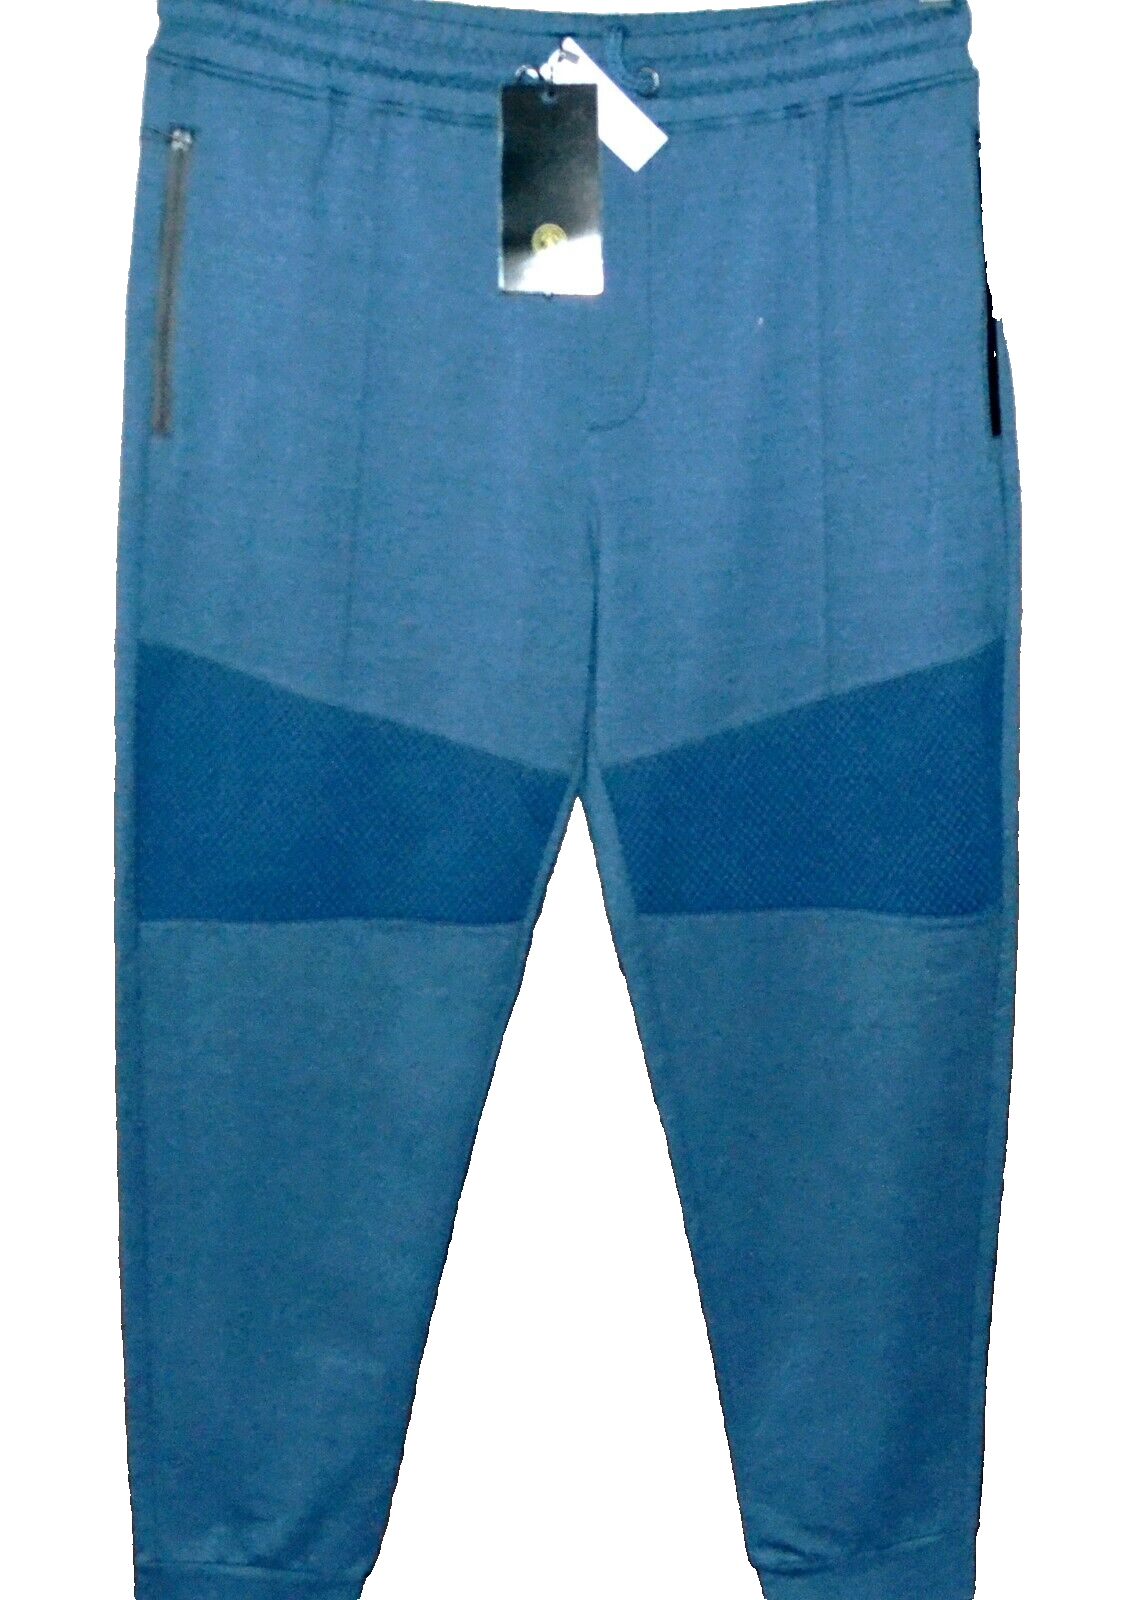 Primary image for Xios Men's Teal Navy Blue Cotton Zip Pocket  Sweatpants Joggers Size 2XL